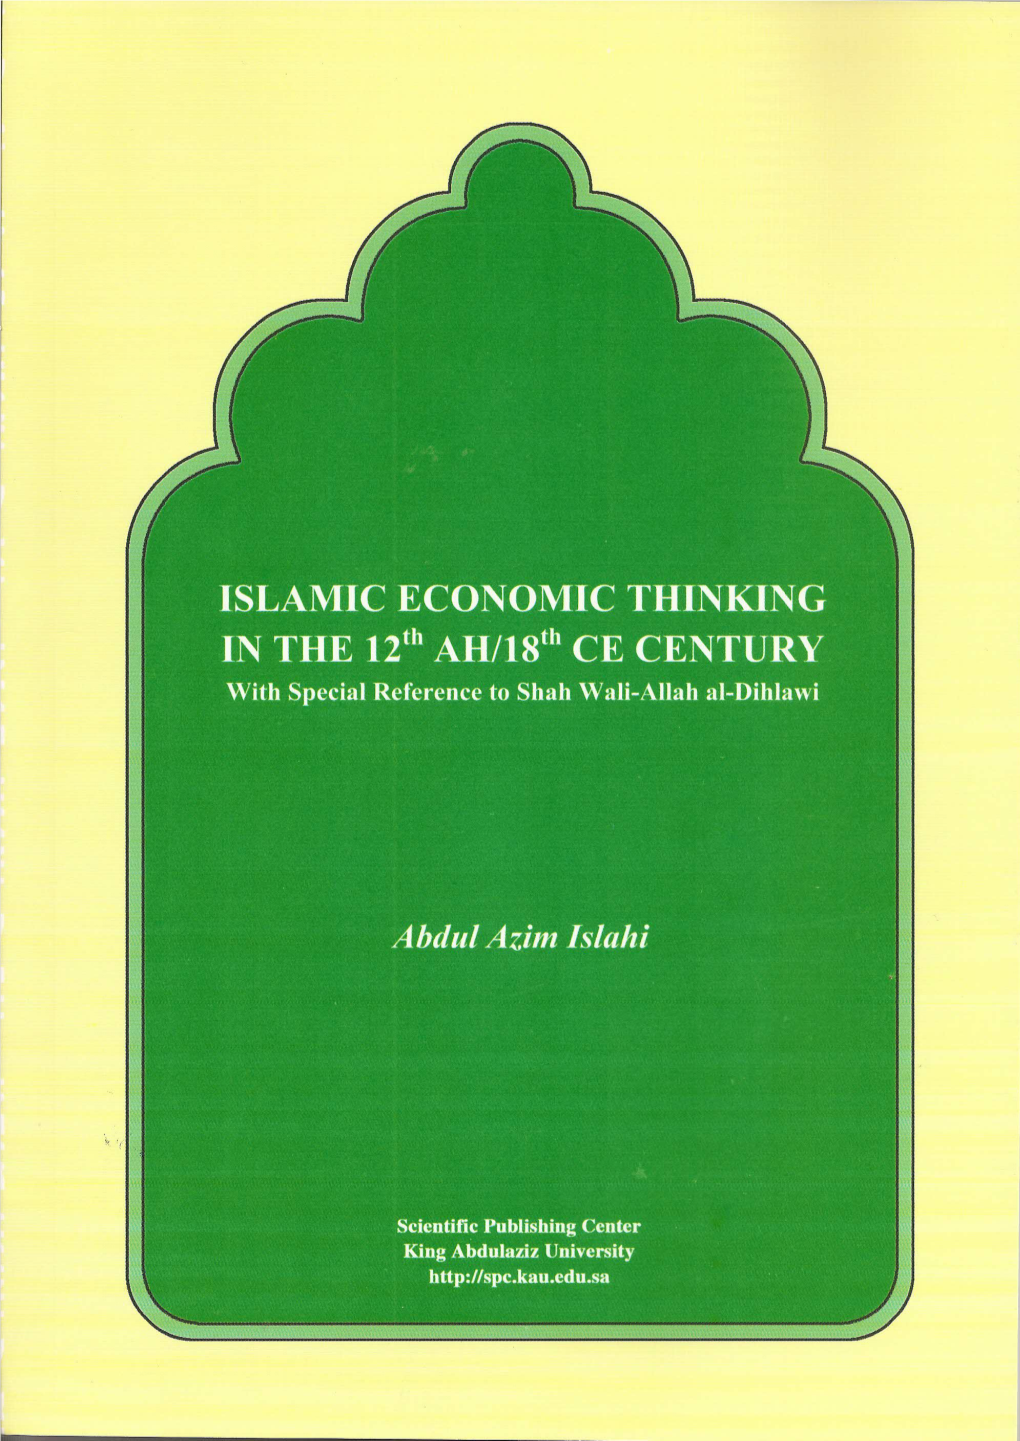 ISLAMIC ECONOMIC THINKING in the 12Th AH/18Th CE CENTURY with Special Reference to Shah Wali-Allah Al-Dihlawi